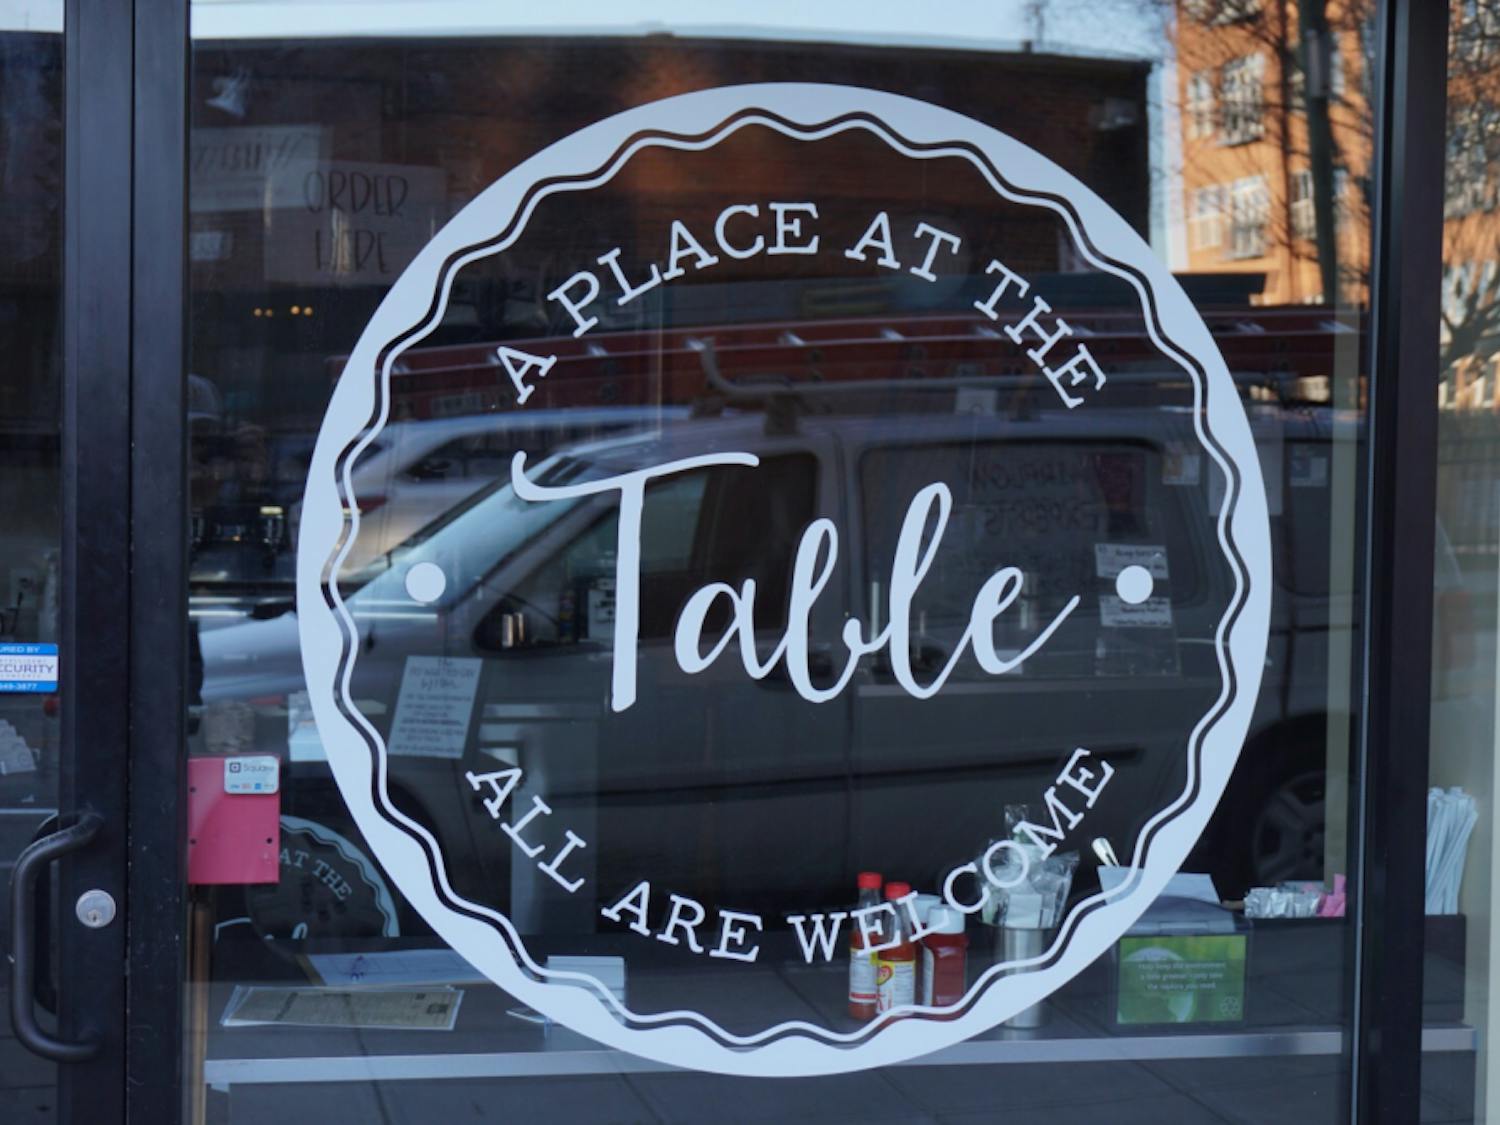 A Place At The Table is the only pay-what-you-can cafe in Raleigh, NC and provides food for people regardless of their ability to pay. Photo by/courtesy of Chase Morales.&nbsp;